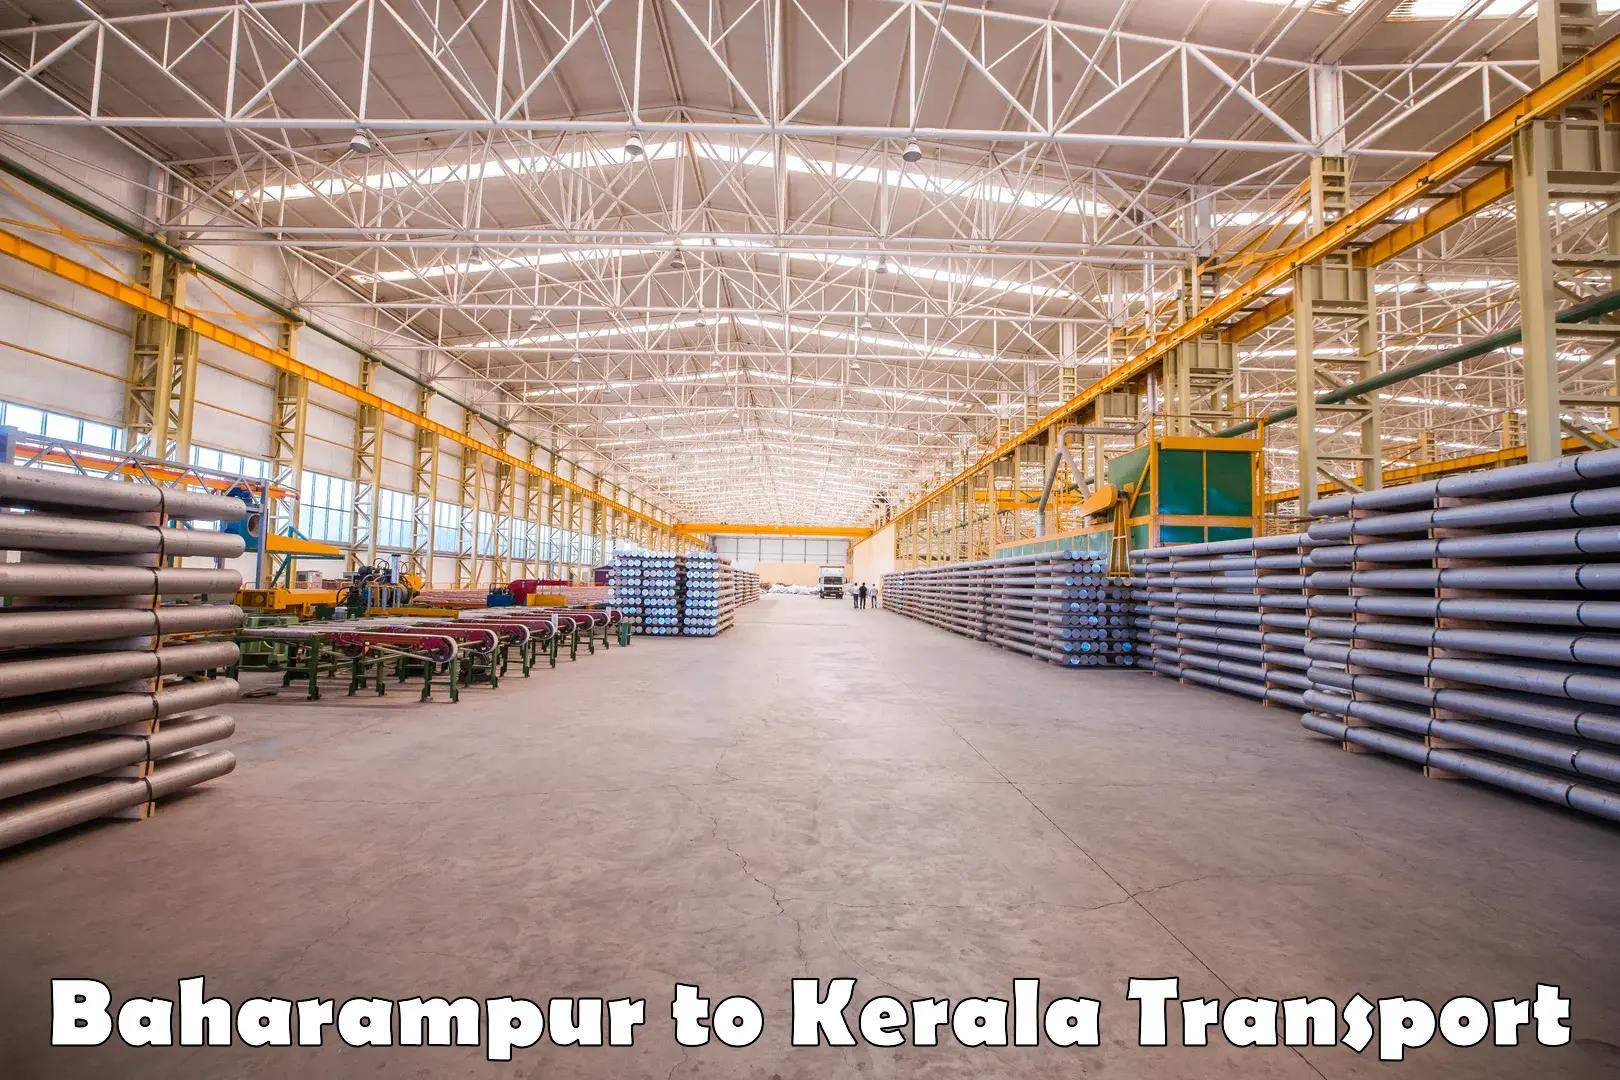 Daily parcel service transport Baharampur to Kerala